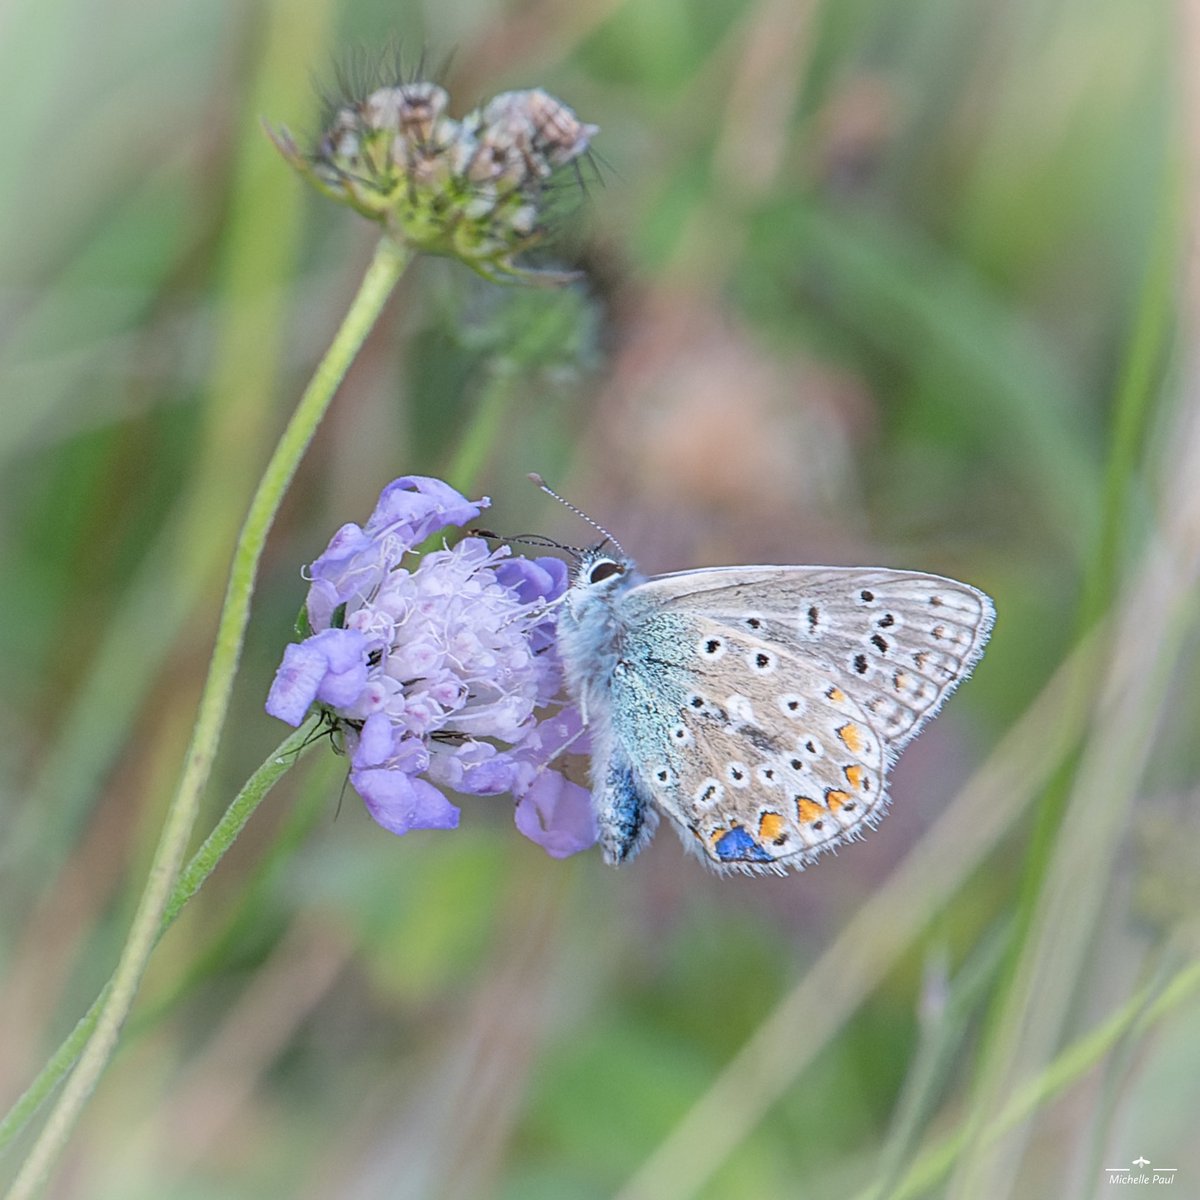 My day out yesterday took me to all corners of nature 💚 The butterflies were just glorious. I’m not good with identification but I think this is a Common Blue 🦋

#TwitterNatureCommunity #TwitterNaturePhotography #NatureBeauty #Butterflies #Lepidopterology #Lycaenidae #insects